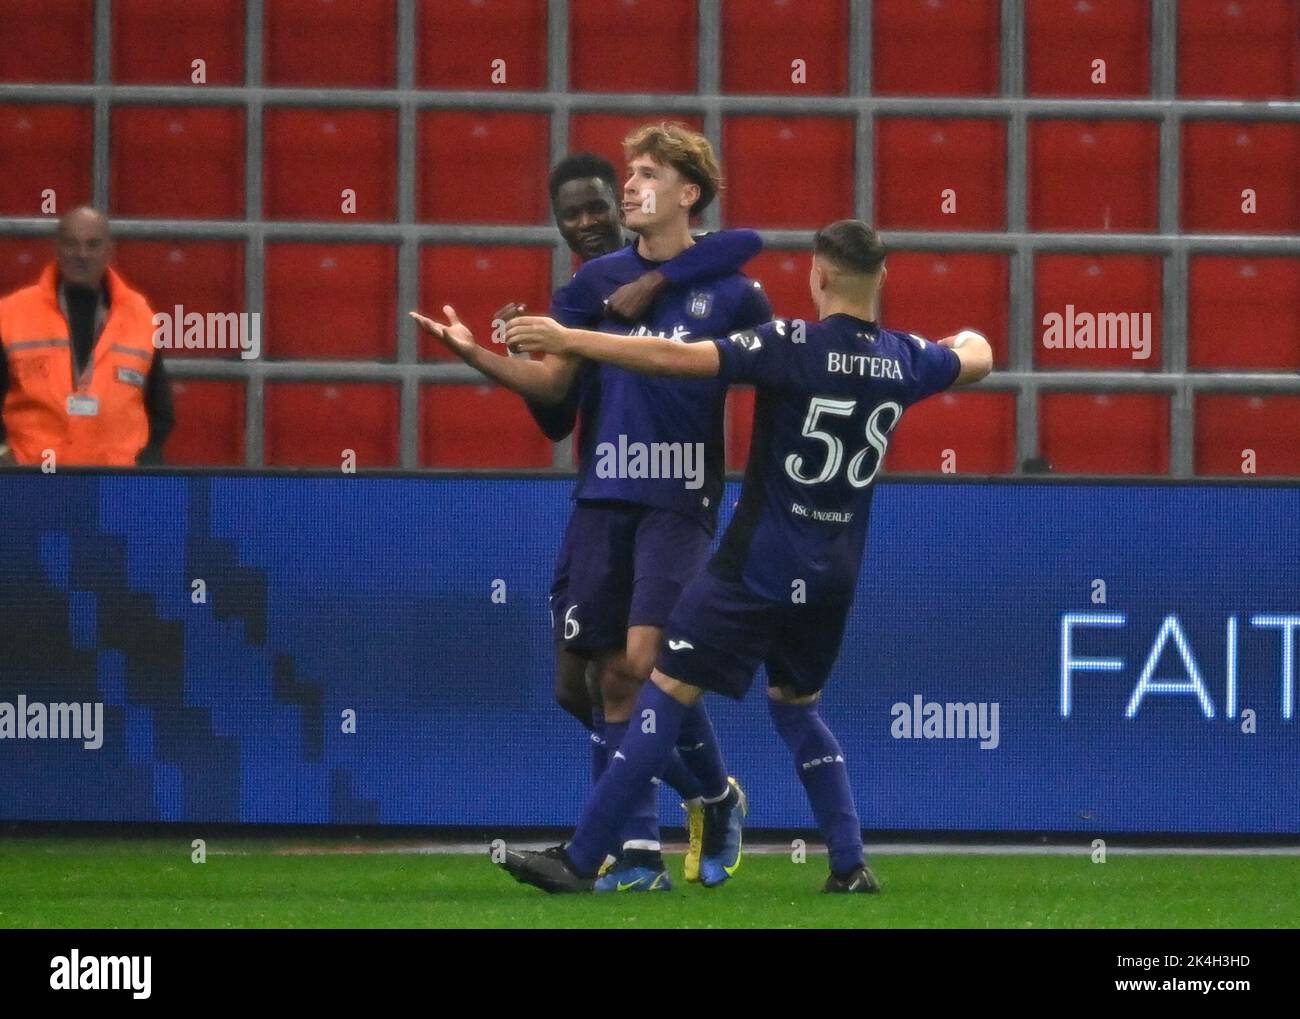 RSCA Futures' Lucas Stassin celebrates after scoring during a soccer match between SL16 FC and RSCA Futures (U23), Sunday 02 October 2022 in Liege, on day 7 of the 2022-2023 'Challenger Pro League' 1B second division of the Belgian championship. BELGA PHOTO JOHN THYS Stock Photo